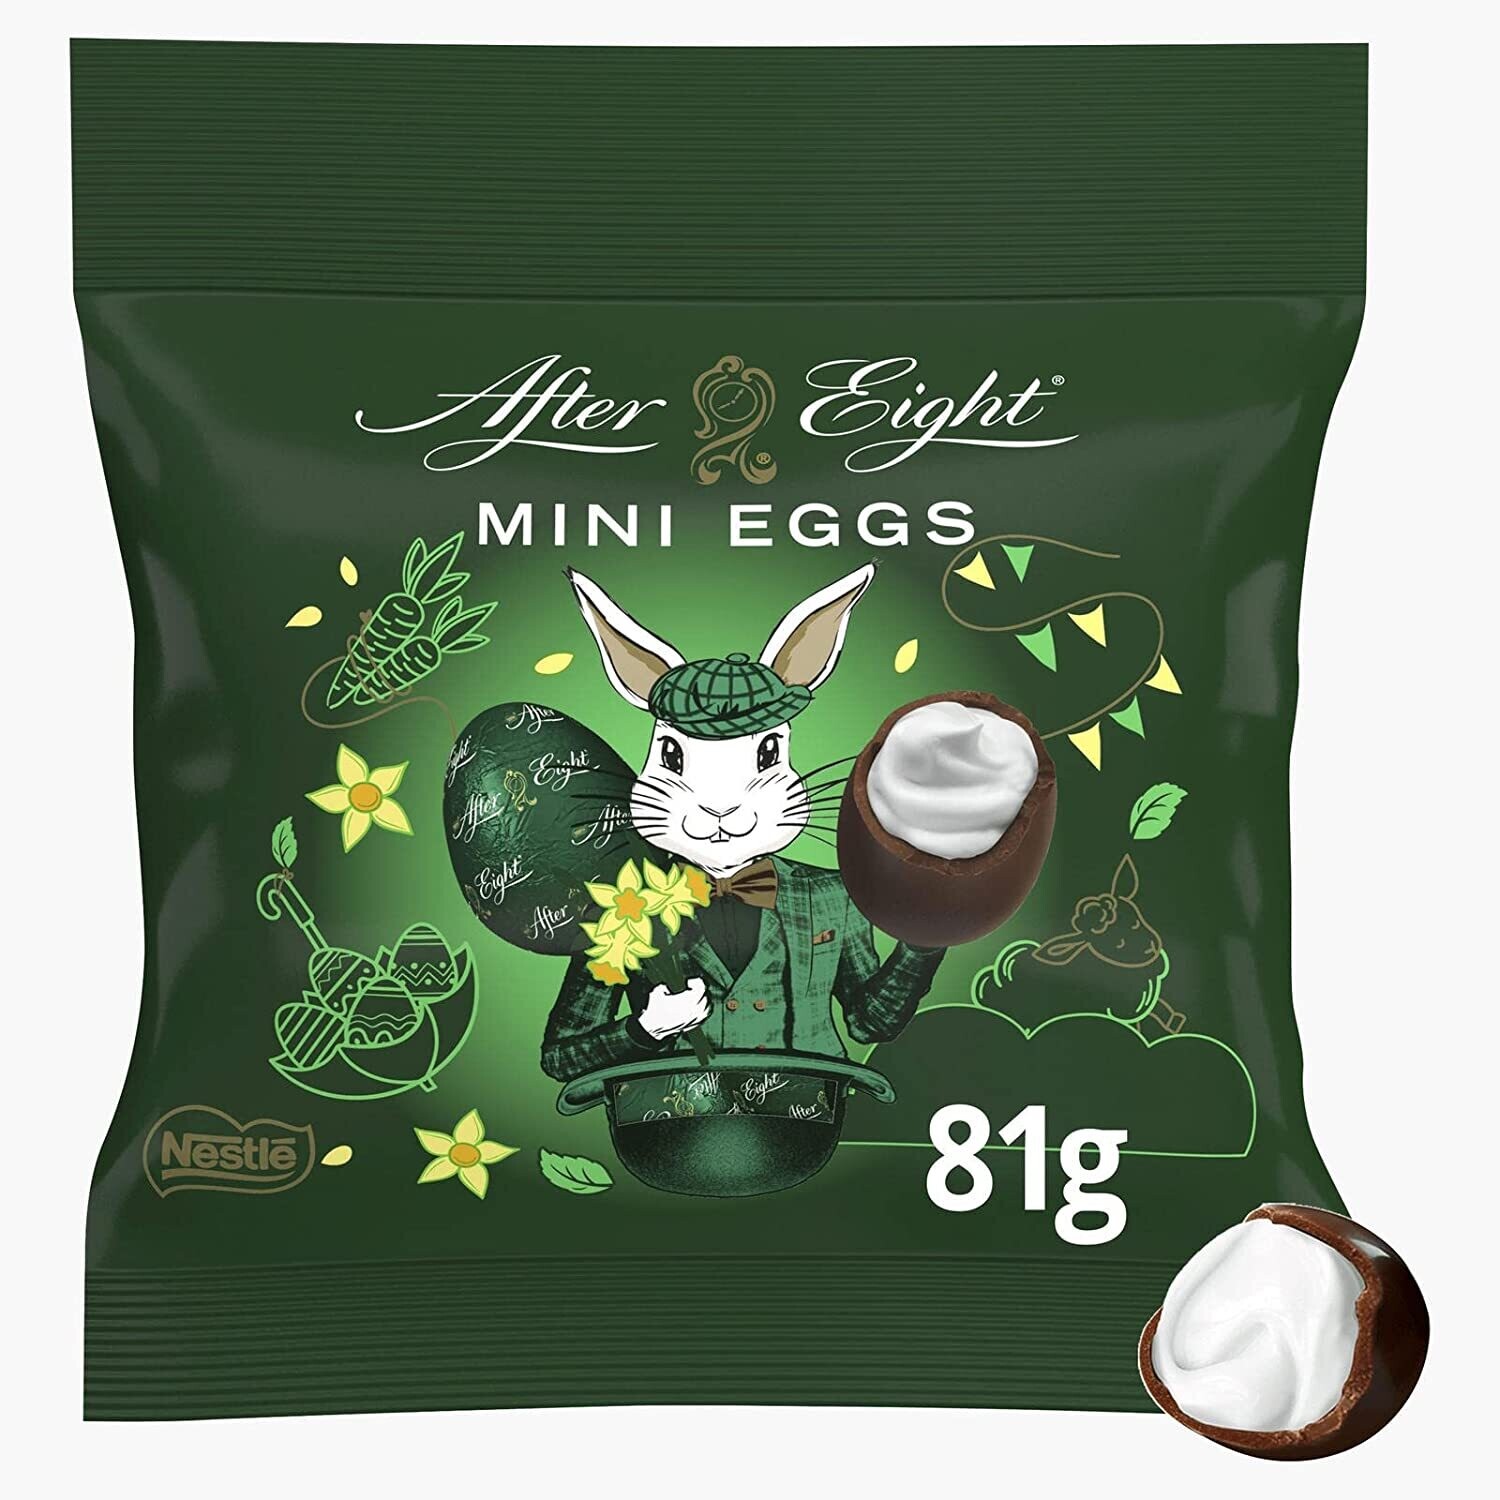 After Eight Mini Easter Eggs Delightfully Minty Dark Chocolate Eggs Delicious 81g | Easter Special Egg Chocolate